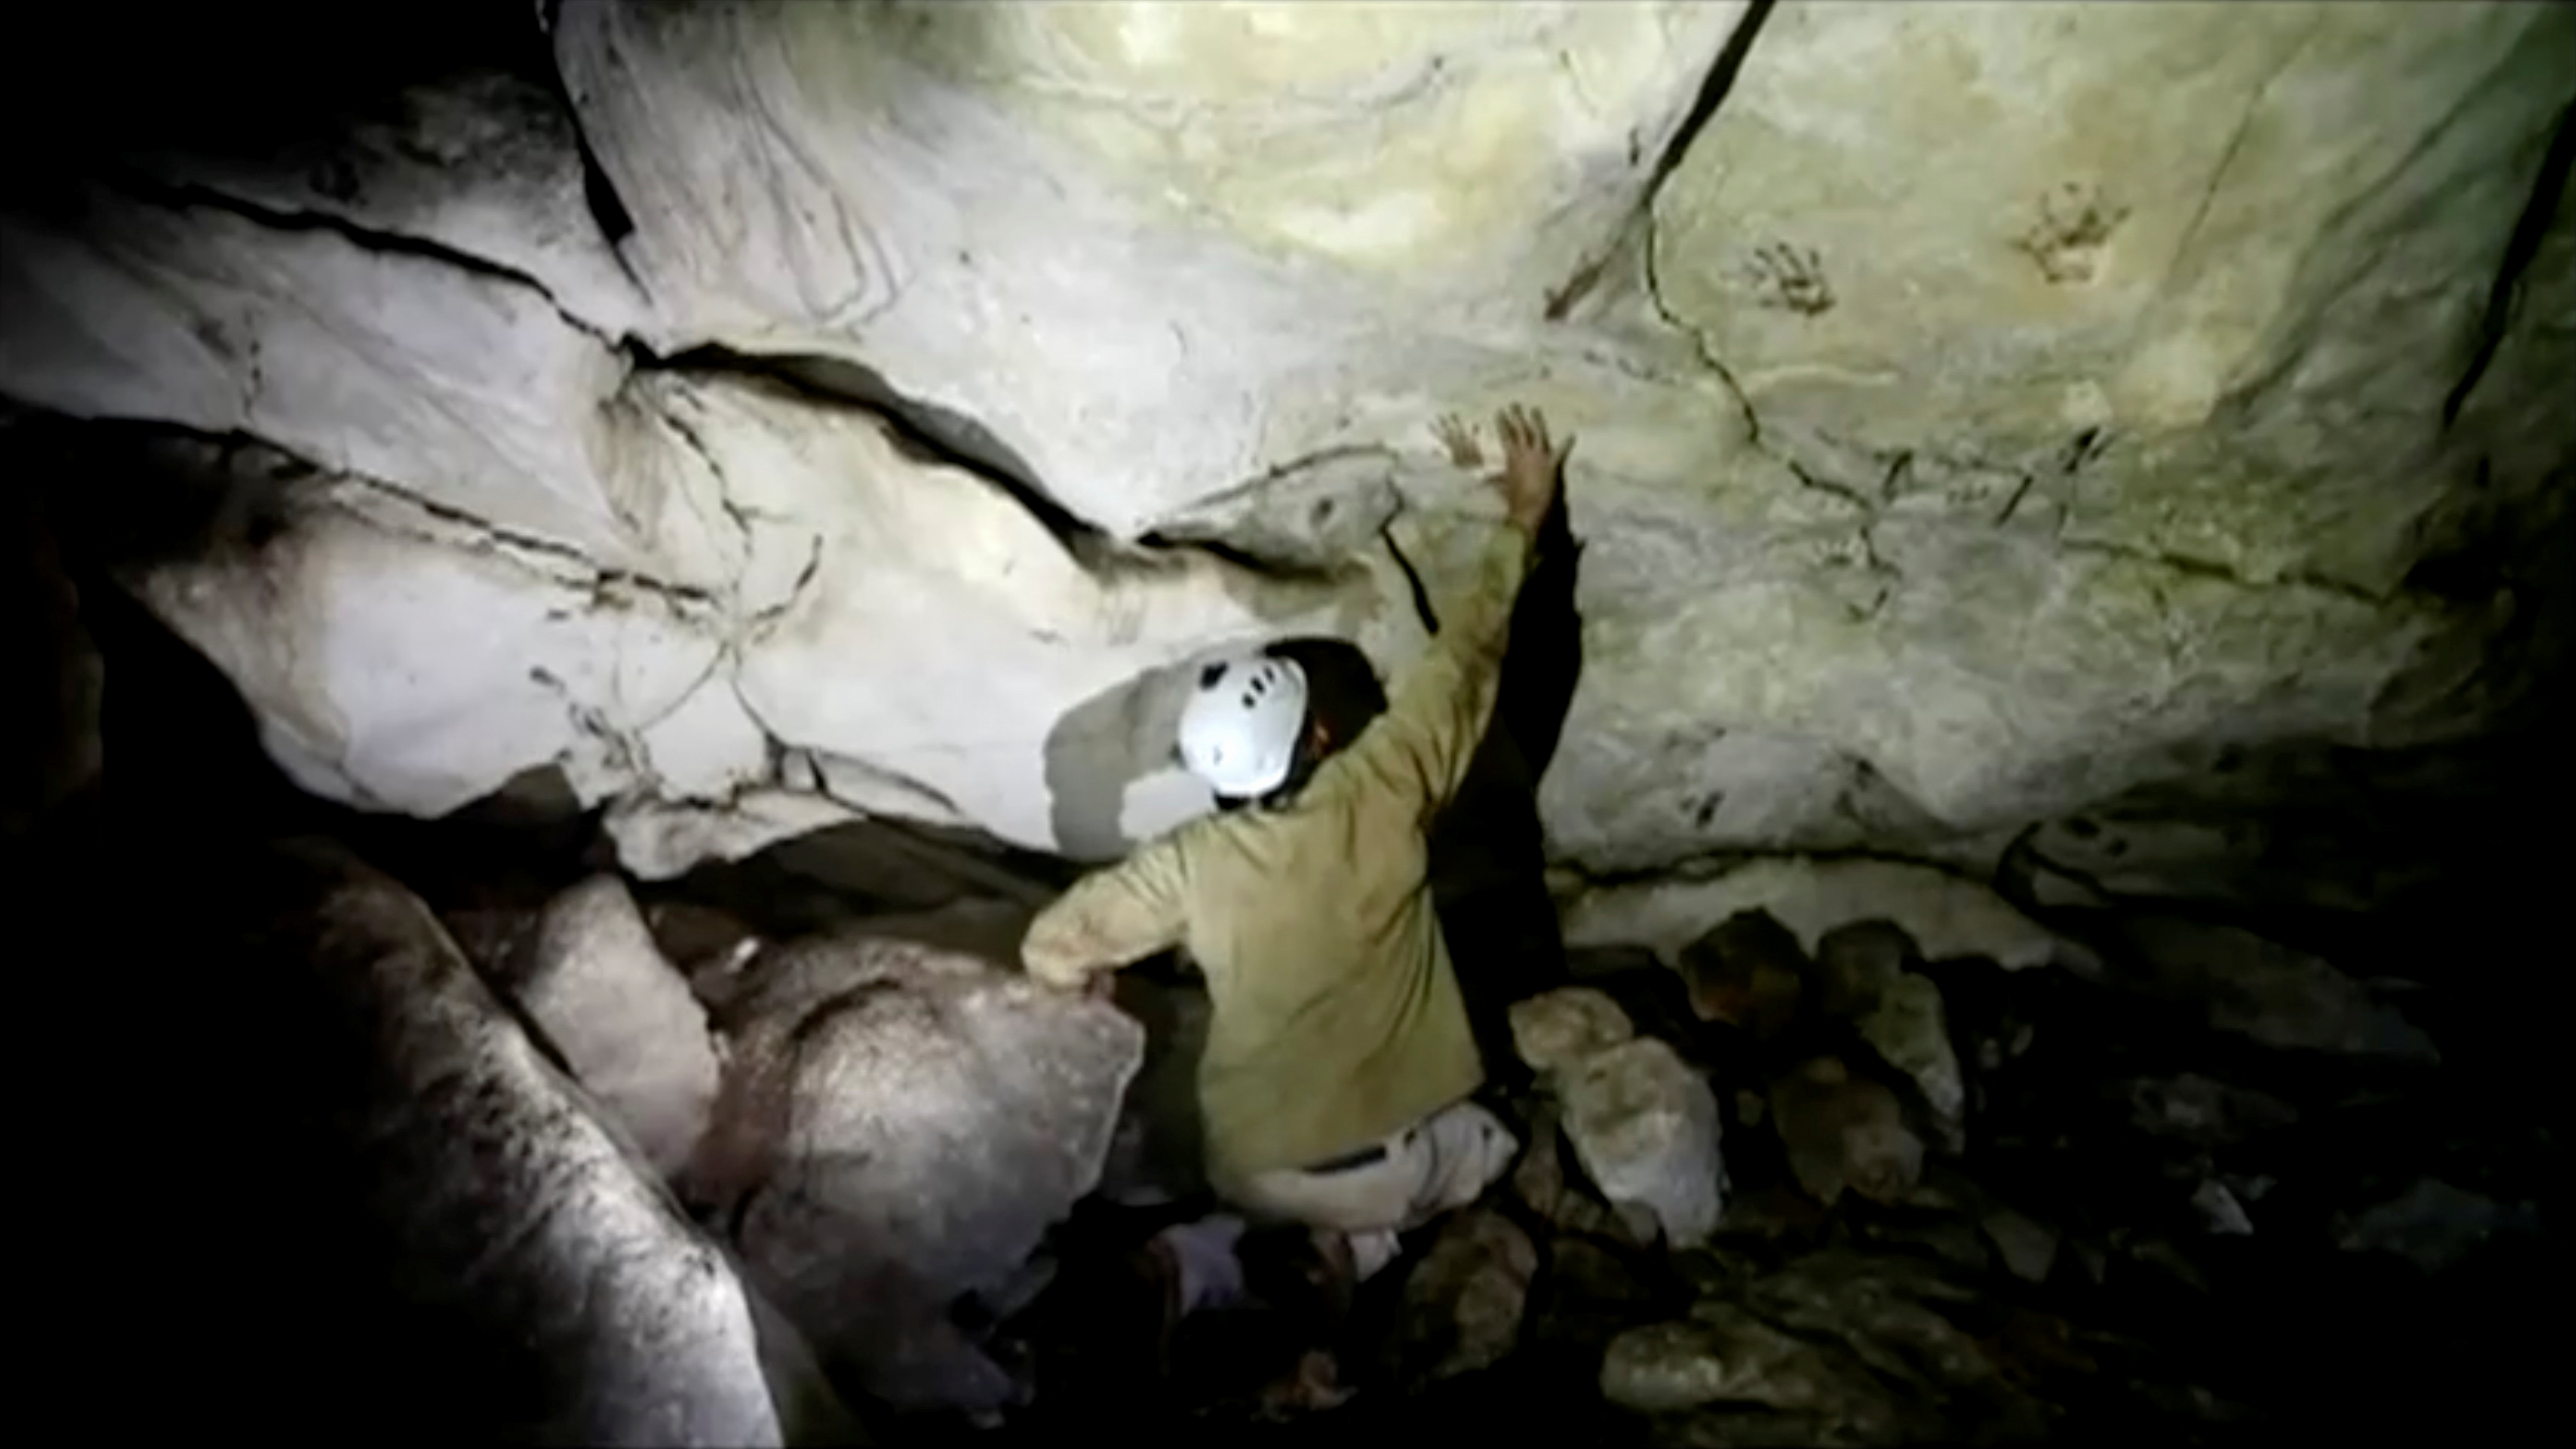 Archeologist Sergio Grosjean explores a cave with hand prints on the walls, in Merida